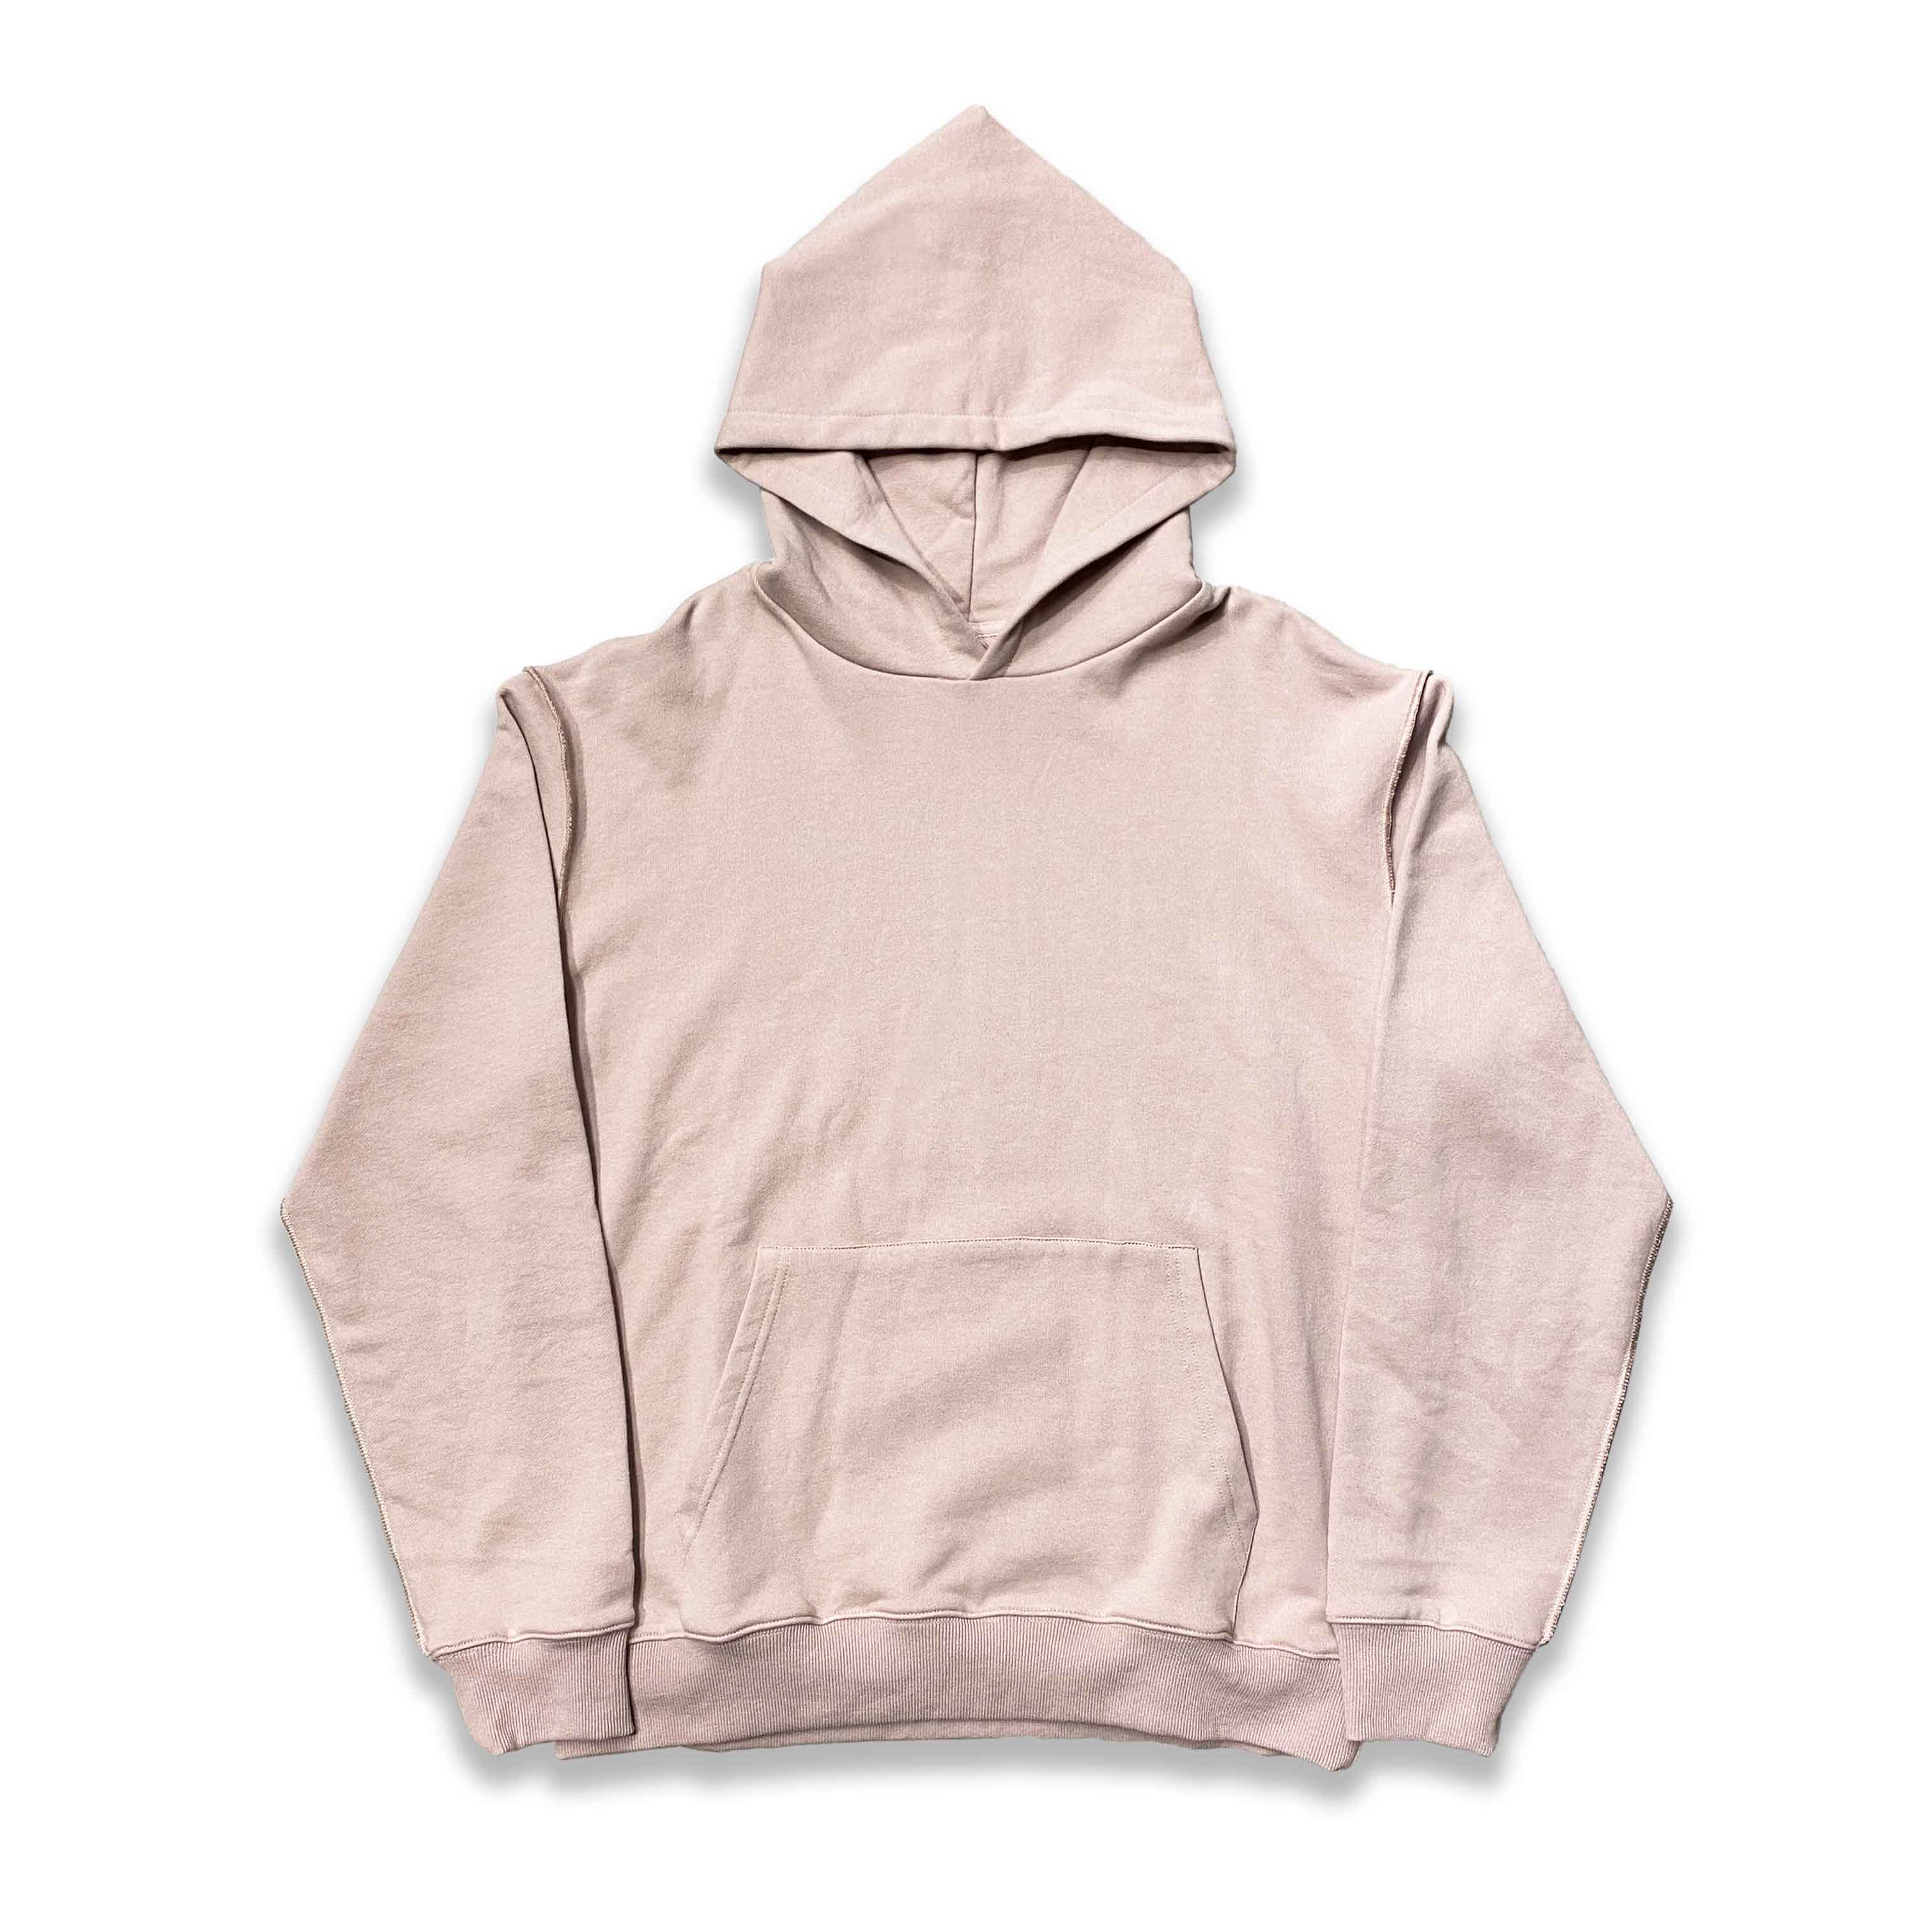 Soled Out Hoodie Peach New Size M